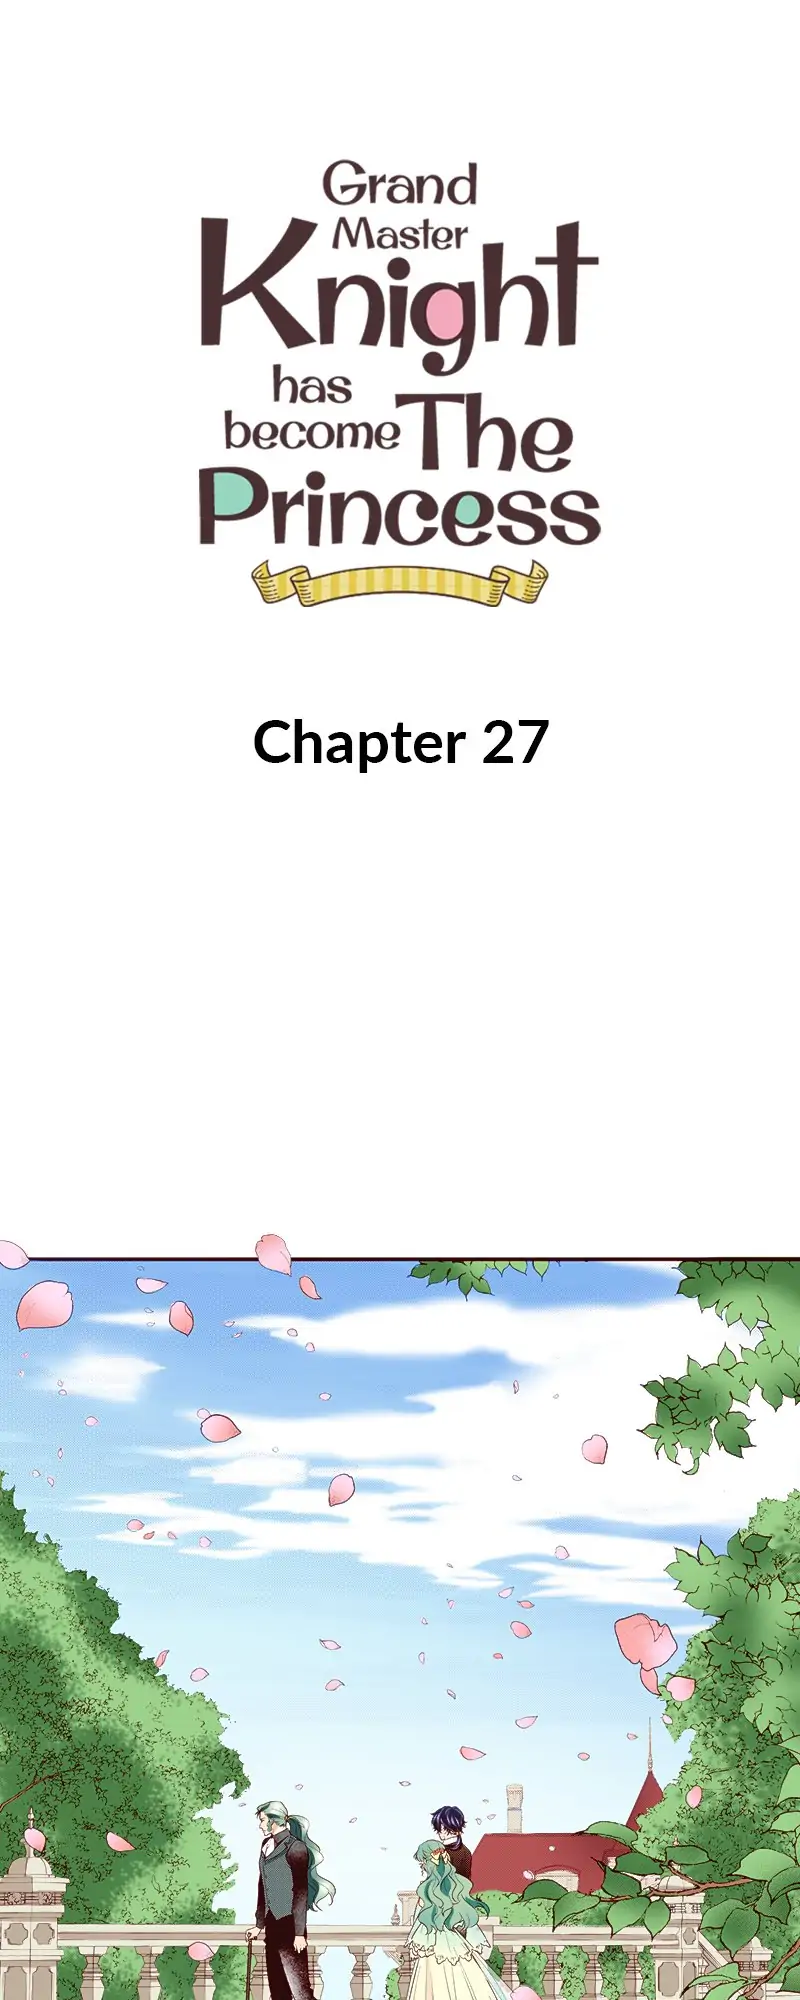 Grand Master Knight Has Become the Princess - chapter 27 - #1